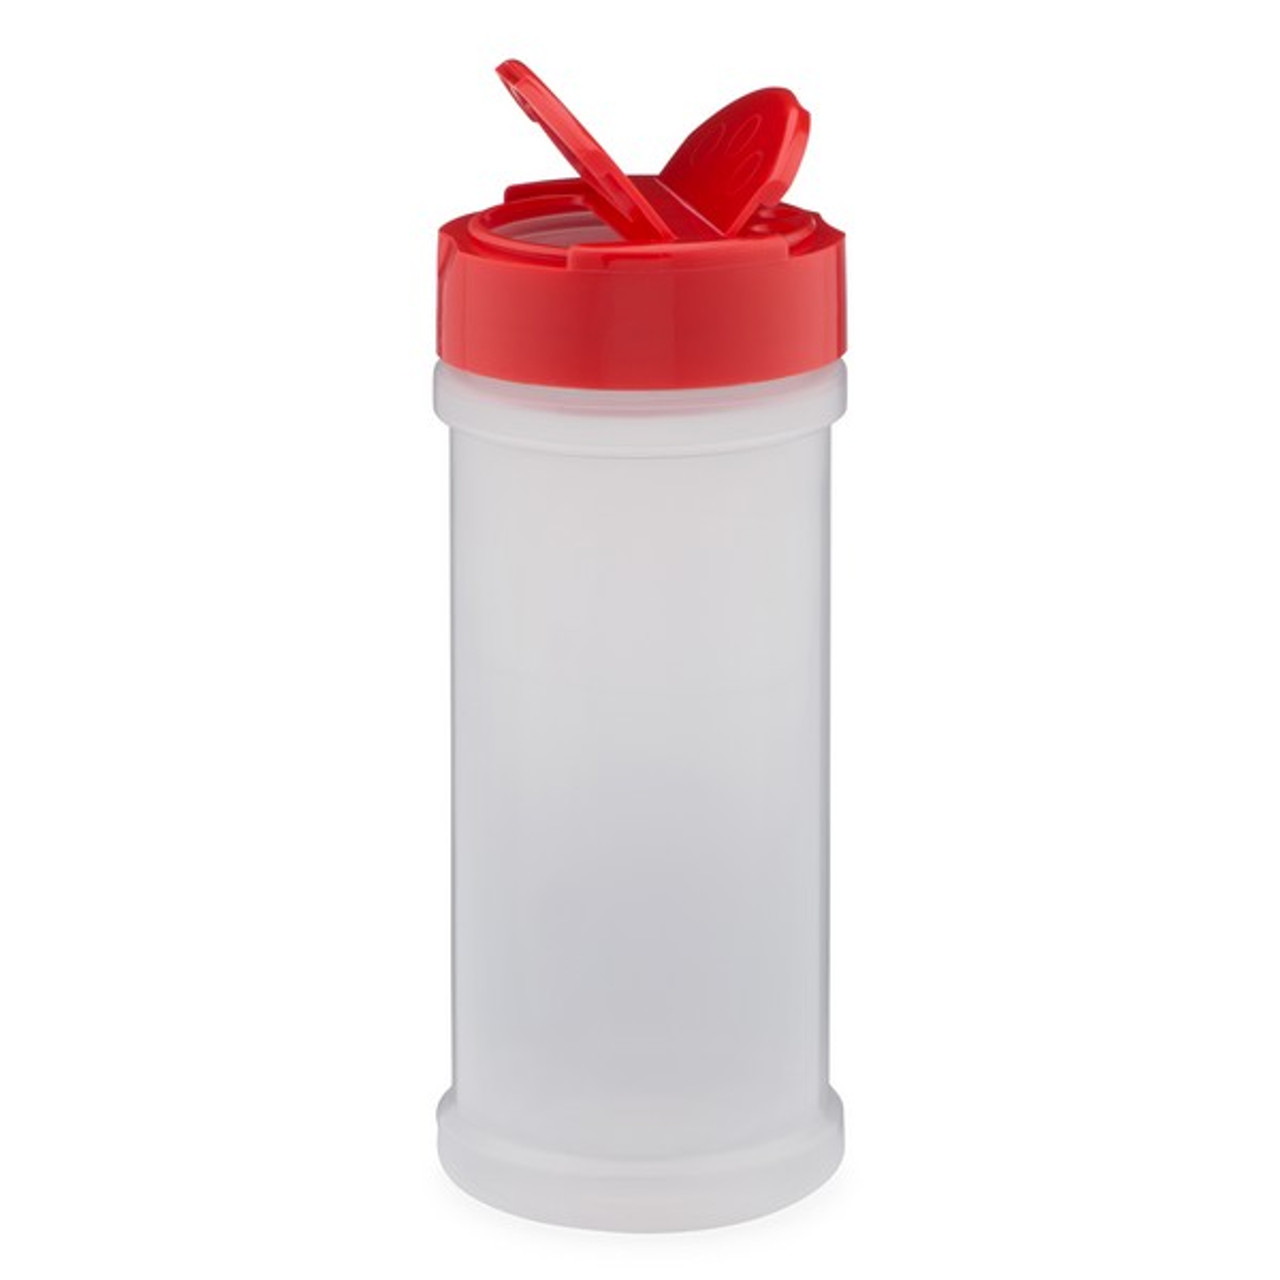 Spice Bottle, Clear, PET, 5.5 Oz, 48-485 - Best Containers